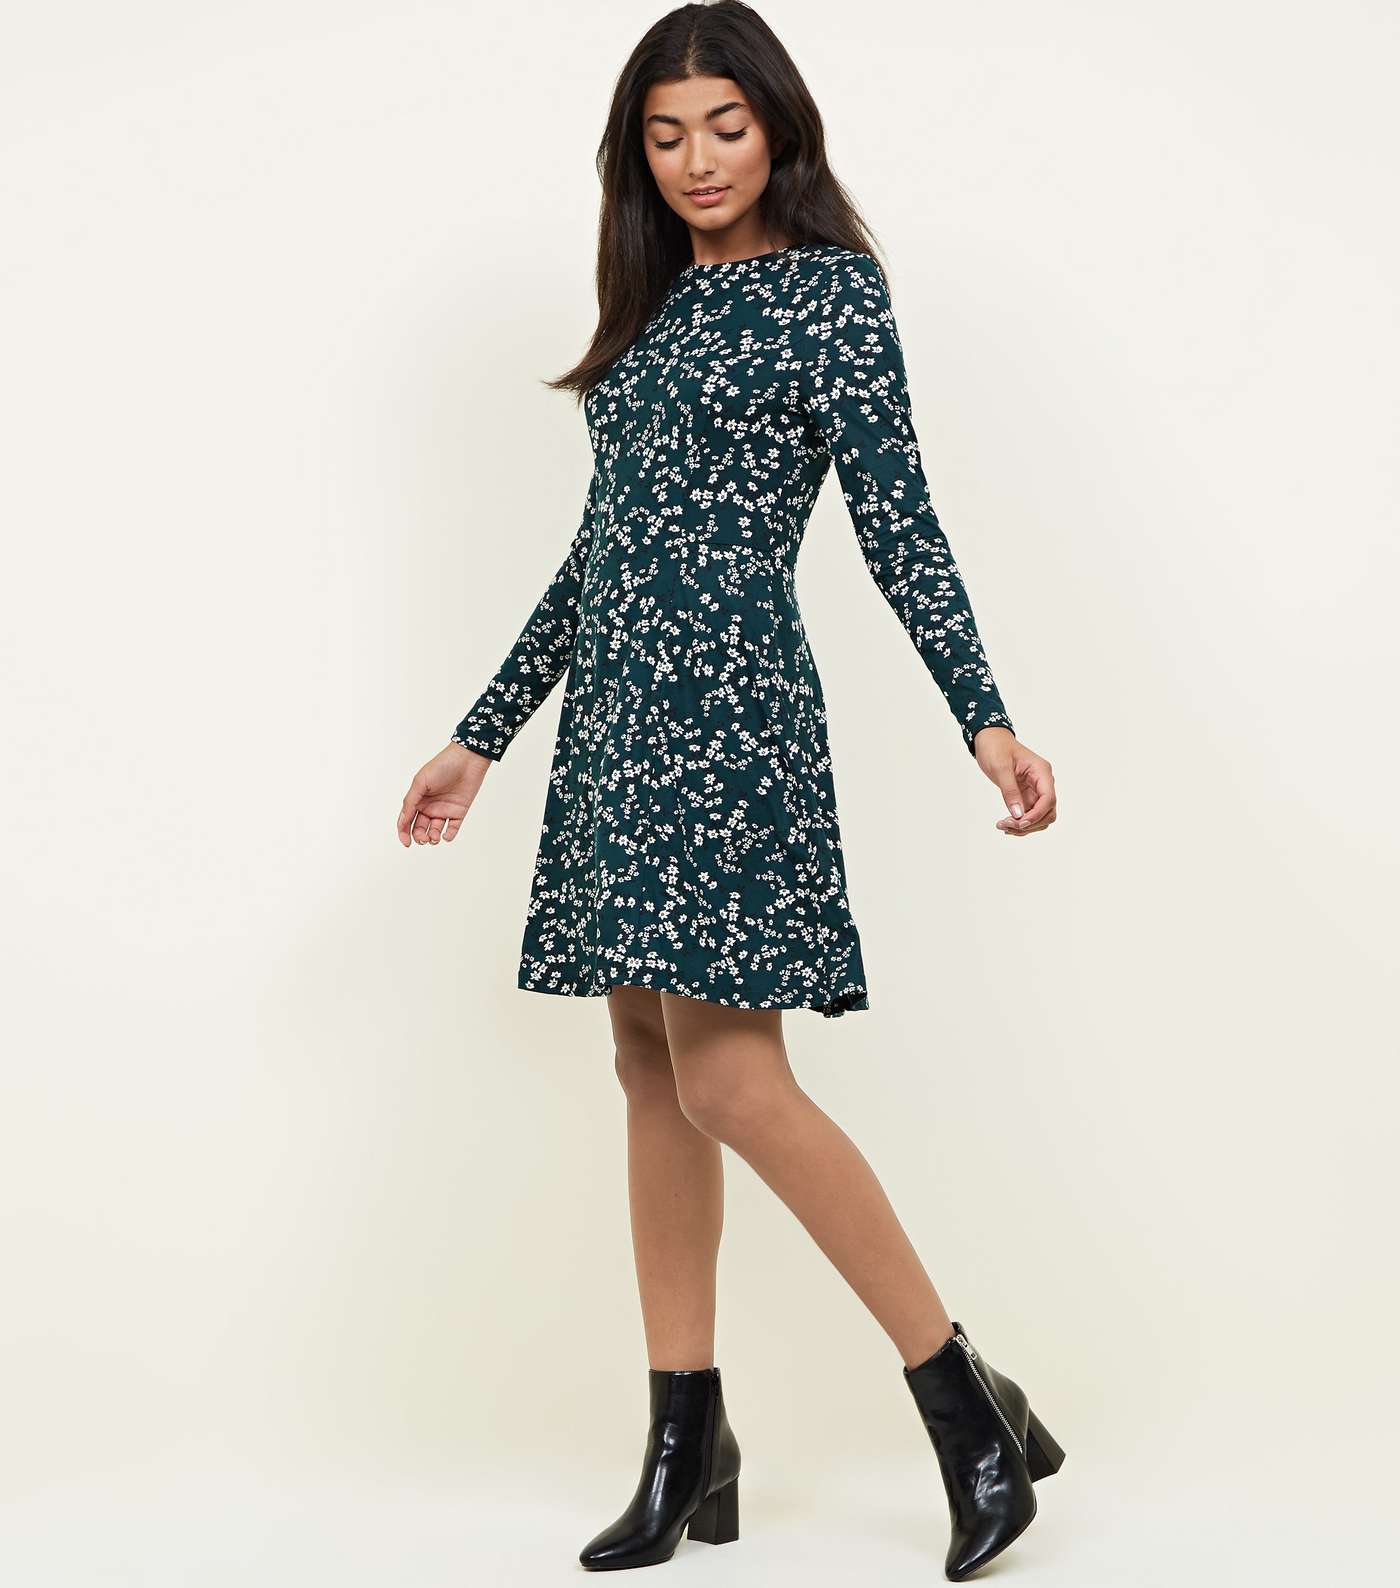 Green Floral Soft Touch Skater Dress Image 2